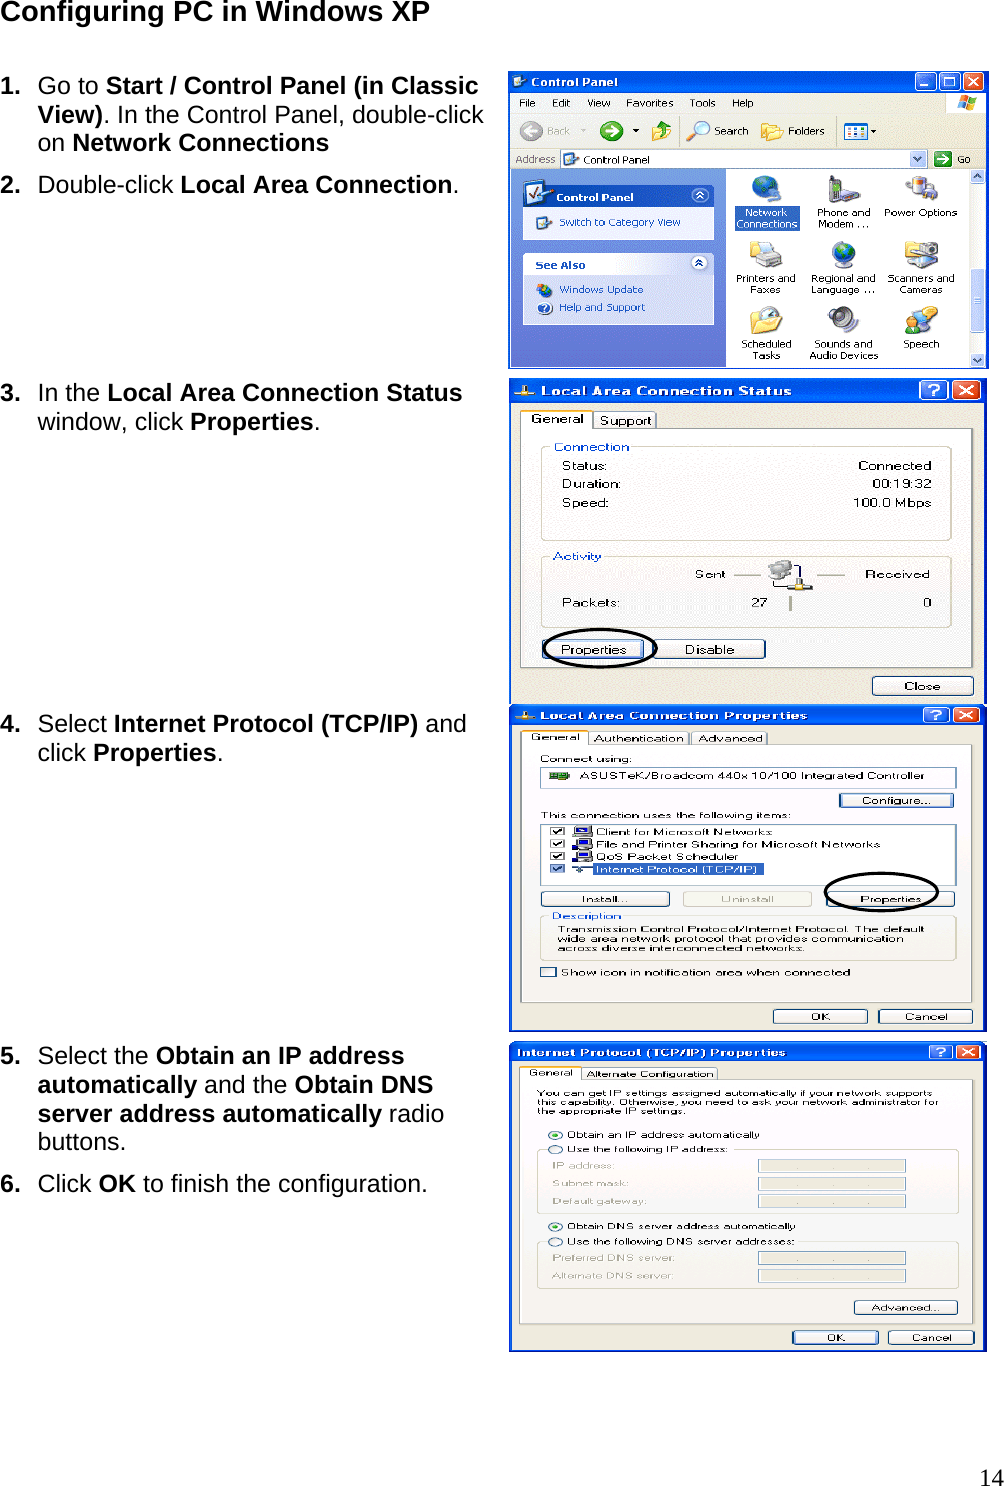 Configuring PC in Windows XP   1.  Go to Start / Control Panel (in Classic View). In the Control Panel, double-click on Network Connections 2.  Double-click Local Area Connection.  3.  In the Local Area Connection Status window, click Properties. 4.  Select Internet Protocol (TCP/IP) and click Properties.  5.  Select the Obtain an IP address automatically and the Obtain DNS server address automatically radio buttons. 6.  Click OK to finish the configuration.   14